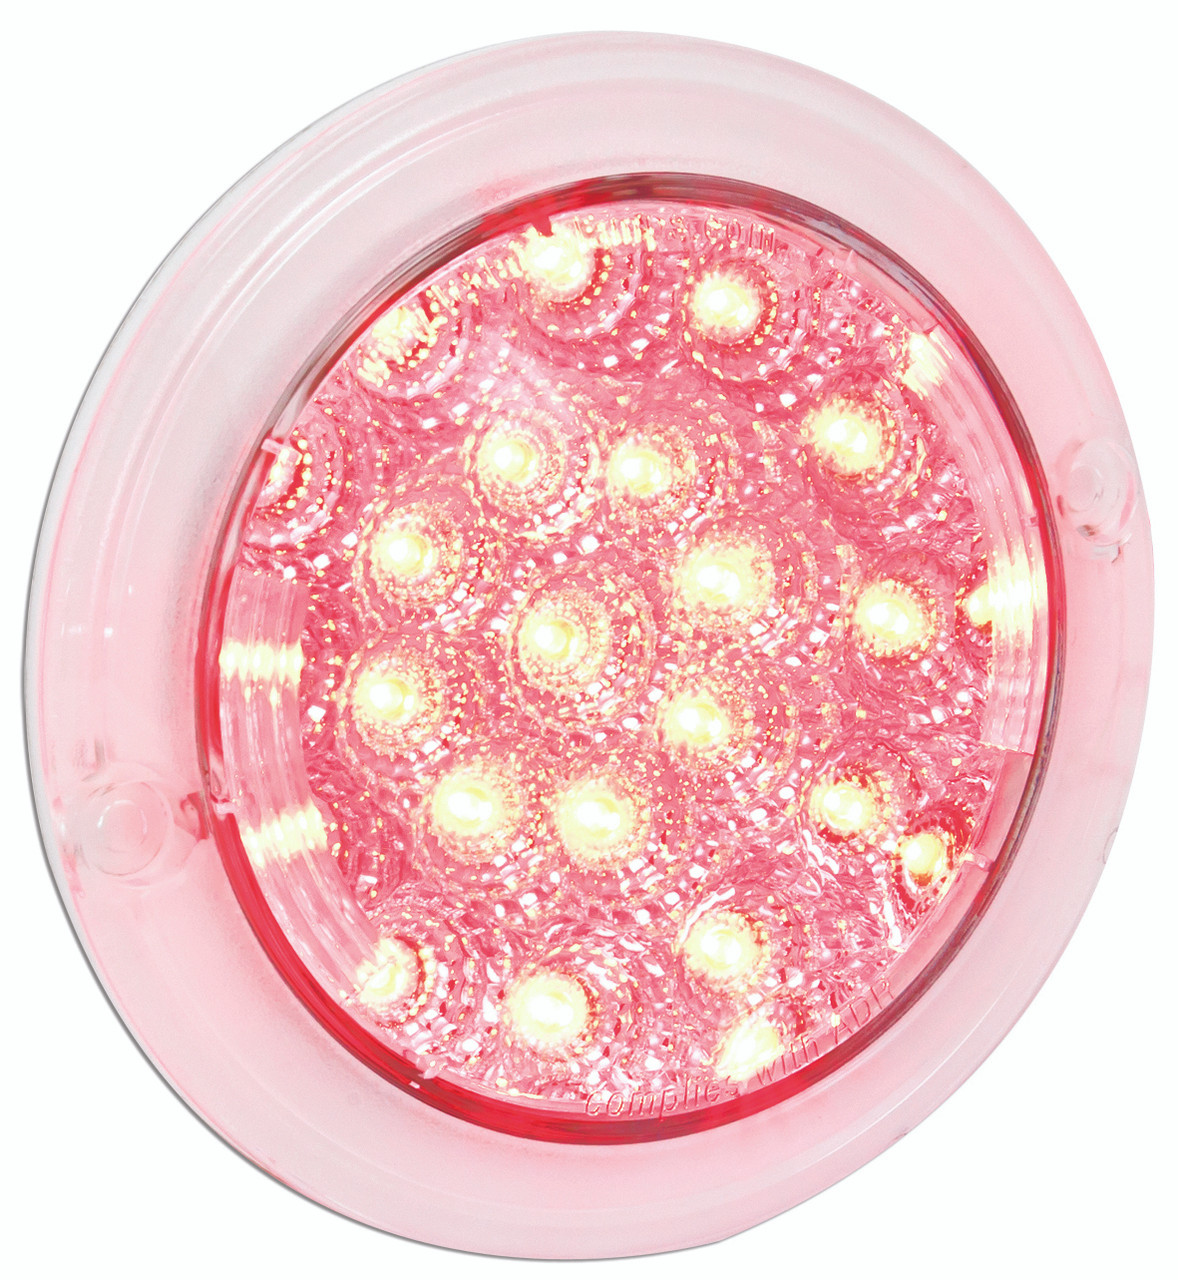 102RCM - Stop, Tail Round Light with Clear Lens. Recess Mount, Screw Secured. Multi-Volt 12v & 24v. Blister Single Pack. LED Auto Lamps. Ultimate LED. 